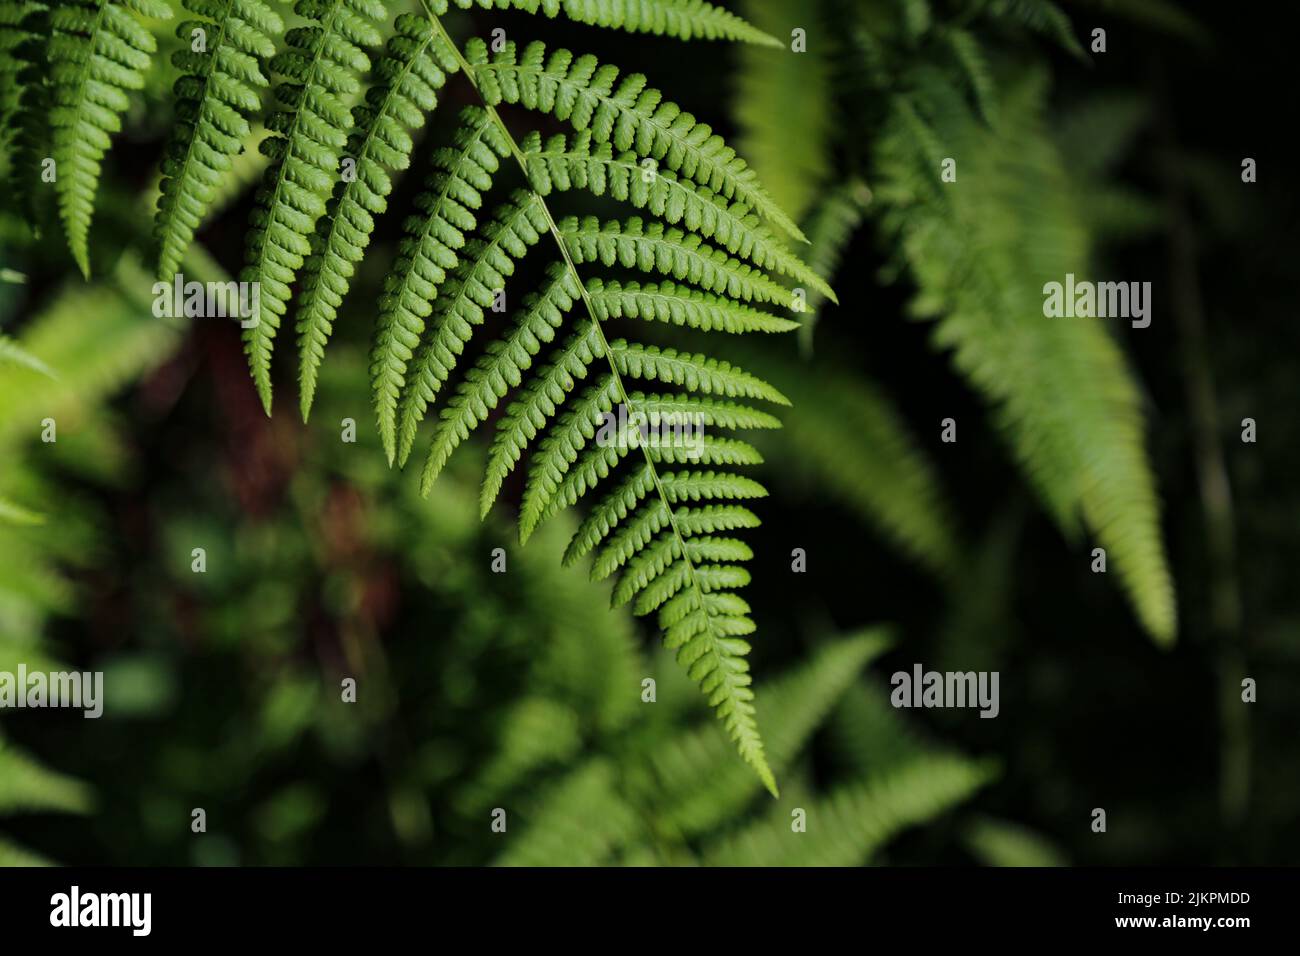 A lady fern frond in the blurred natural background Stock Photo